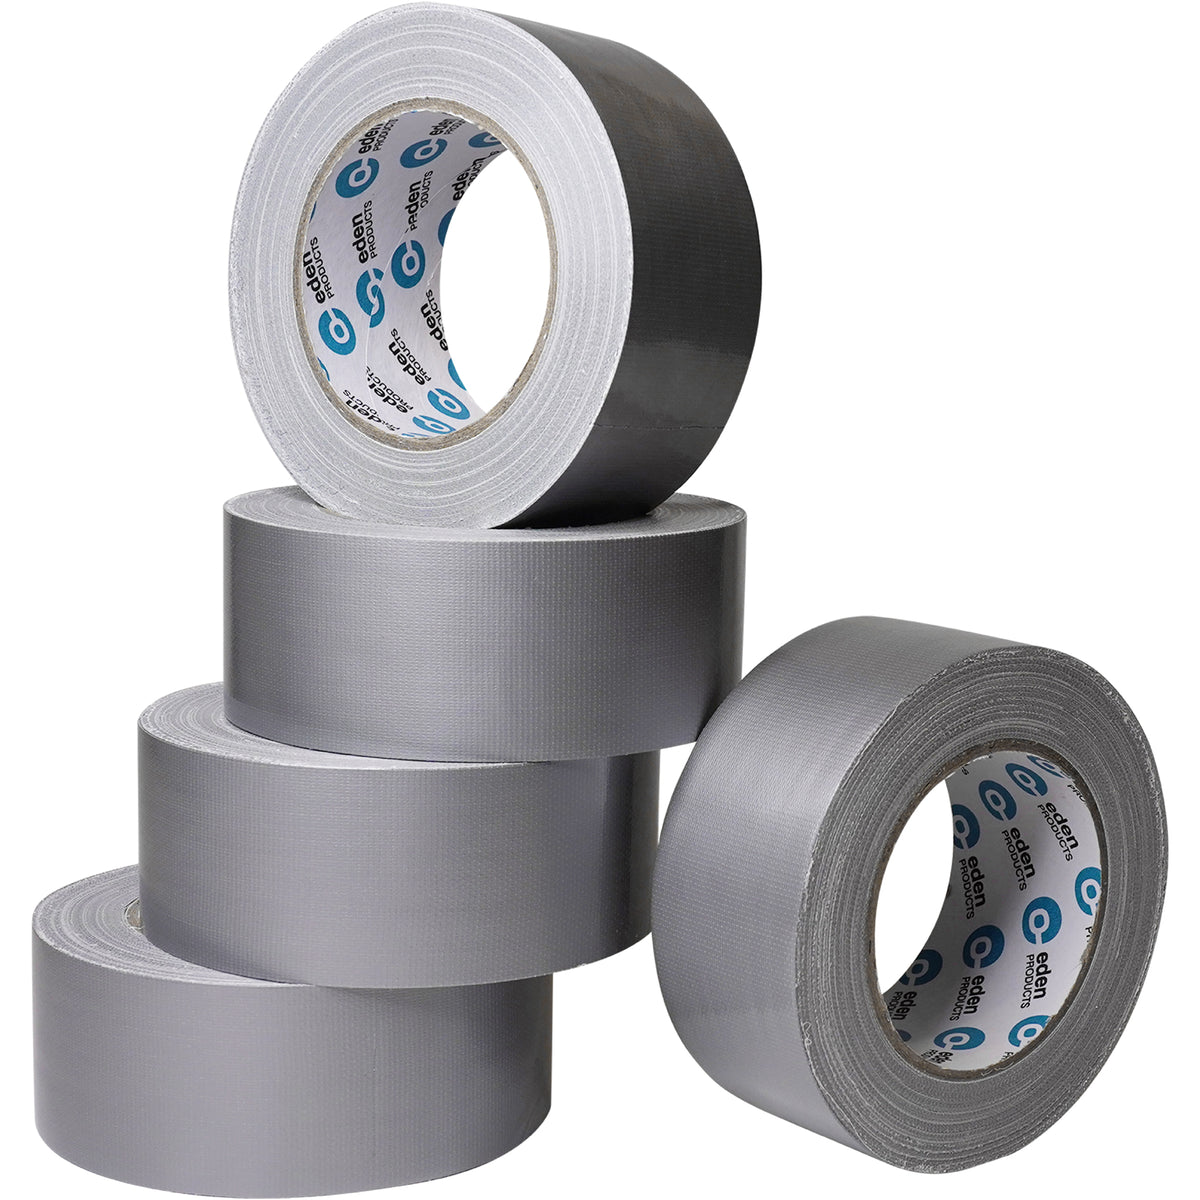 1.89 in. x 30 yd. 300 Heavy-Duty Duct Tape in Silver Air Duct Accessory